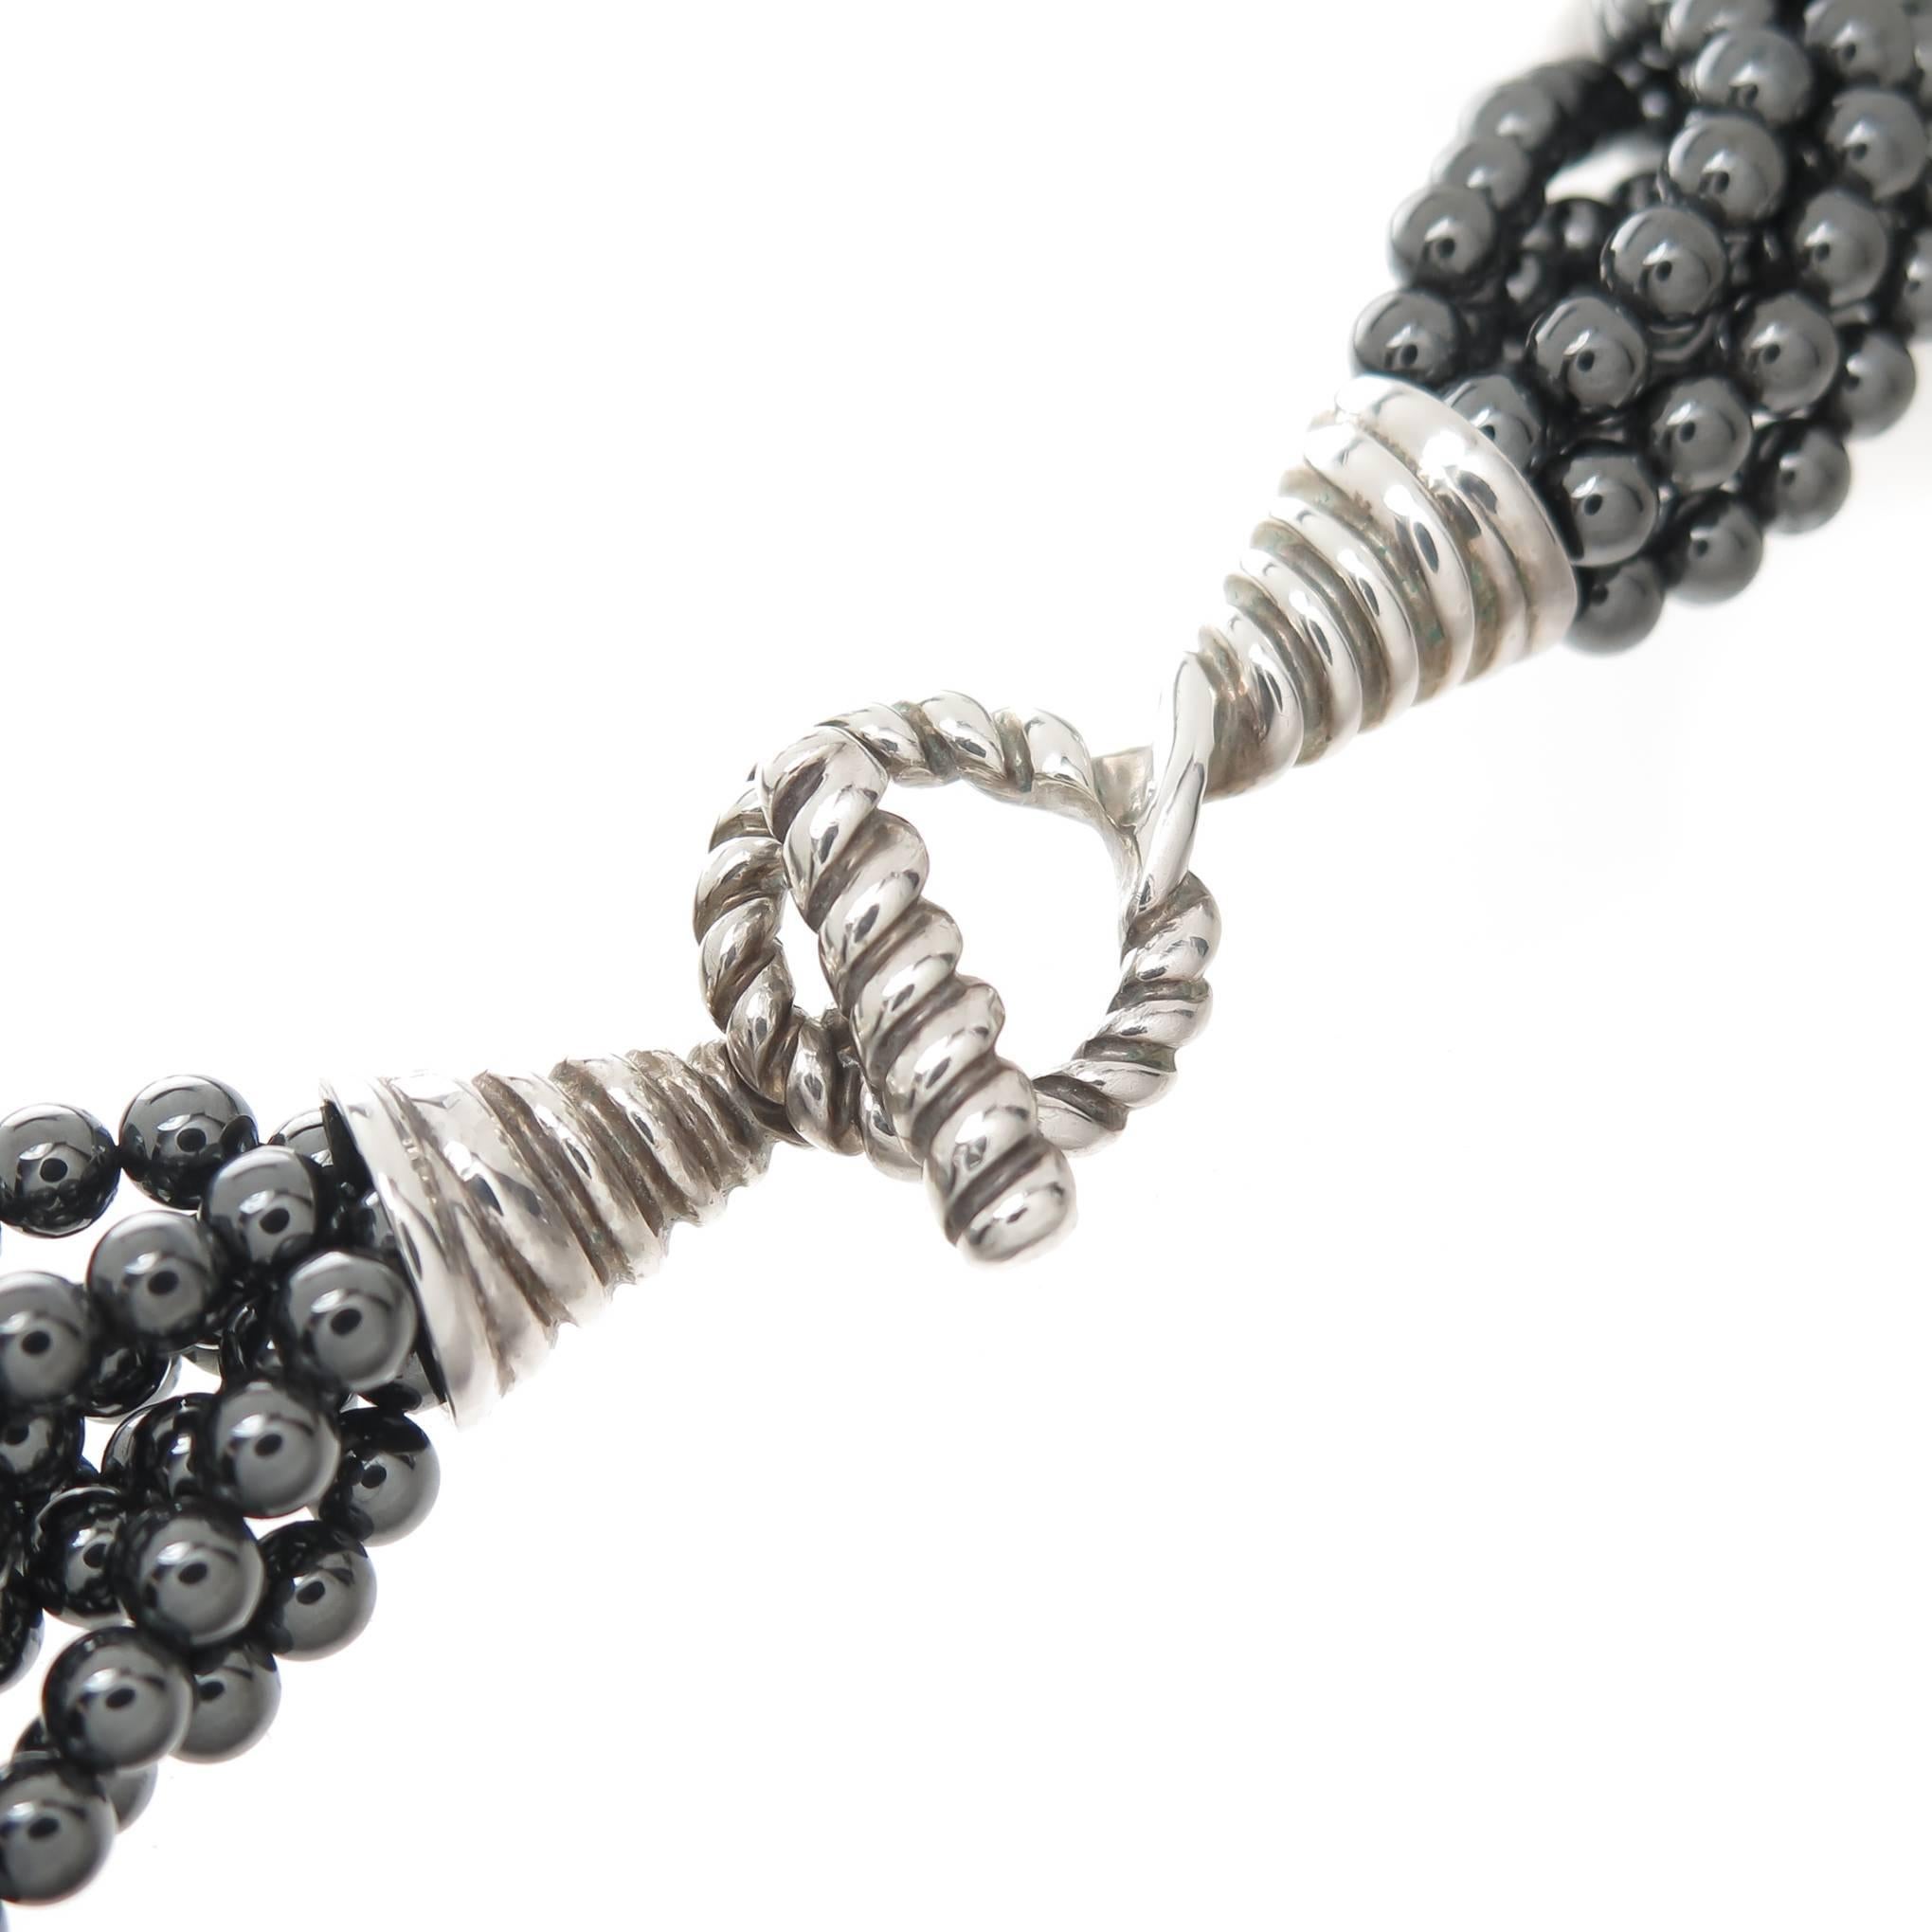 Circa 2000 Tiffany & Company Hematite Bead Torsade Necklace, consisting of several strands of 4 MM Grayish Black Hematite Beads and having a sterling silver toggle clasp. The necklace measures 17 1/2 inches in length and 3/4 inch wide. Comes in